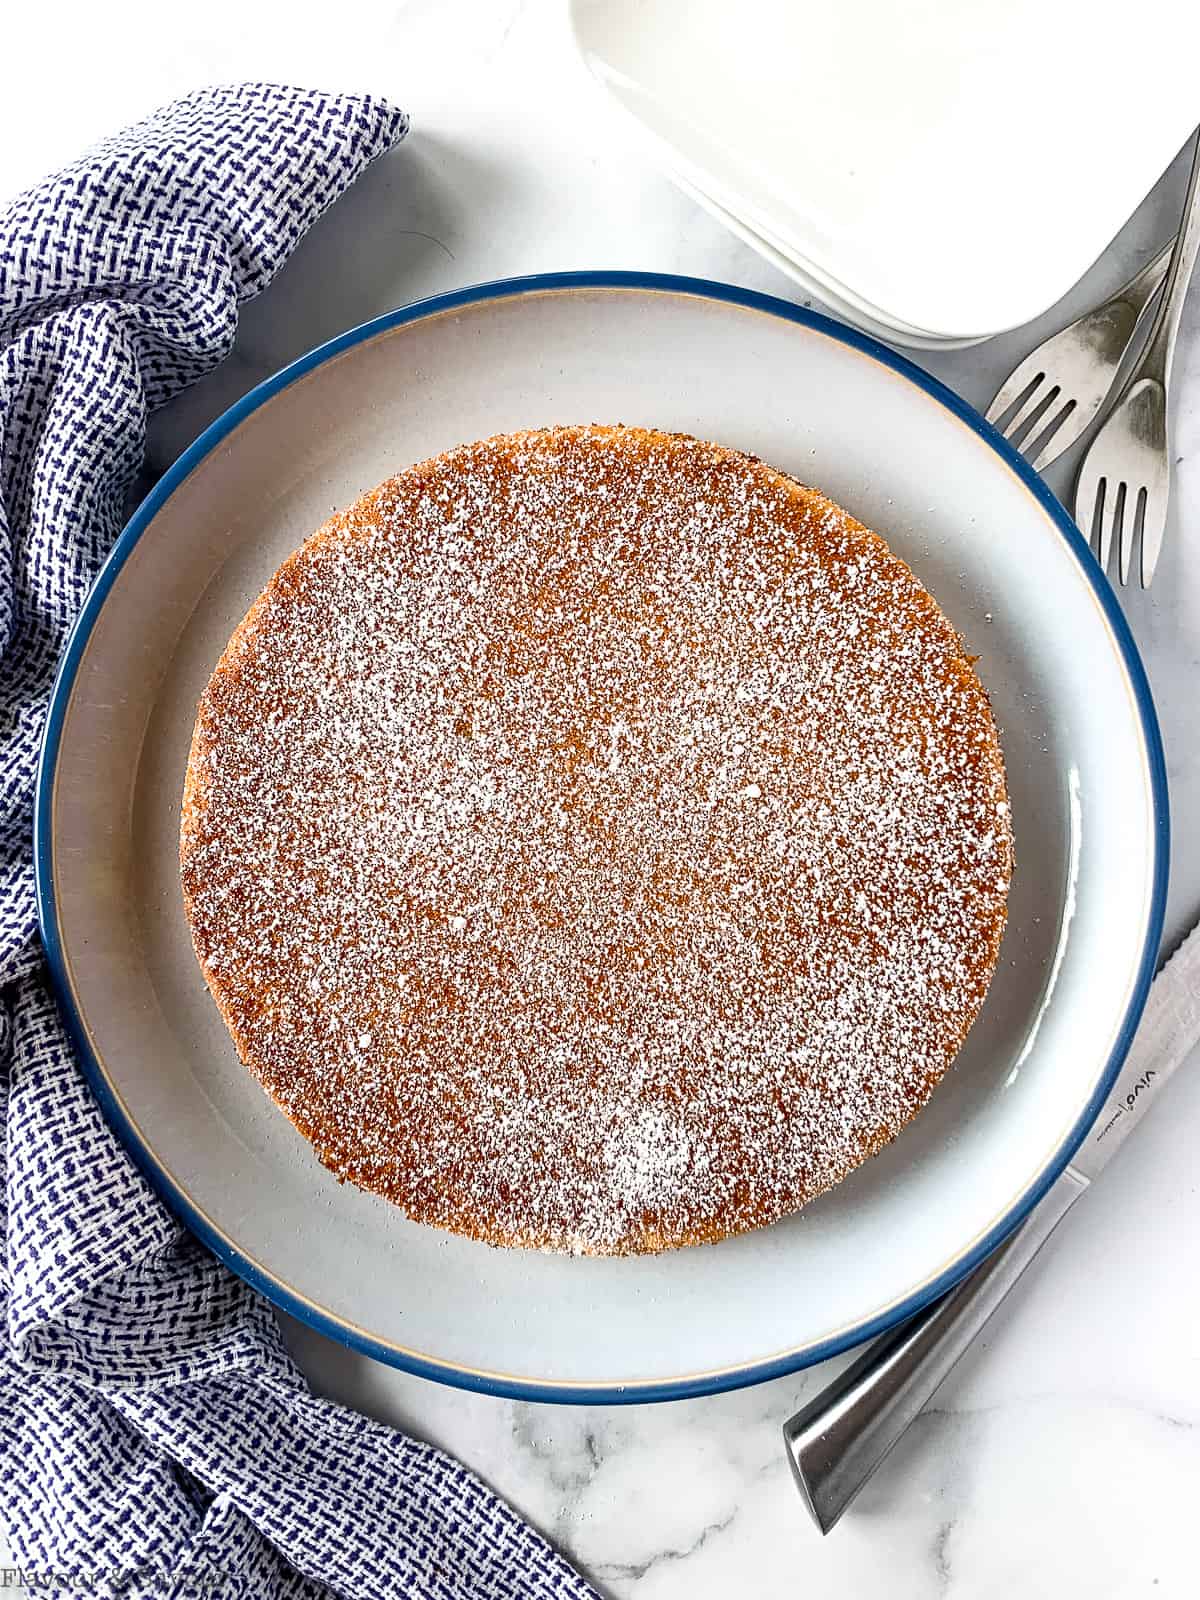 Baked lemon almond cake with powdered sugar on top.